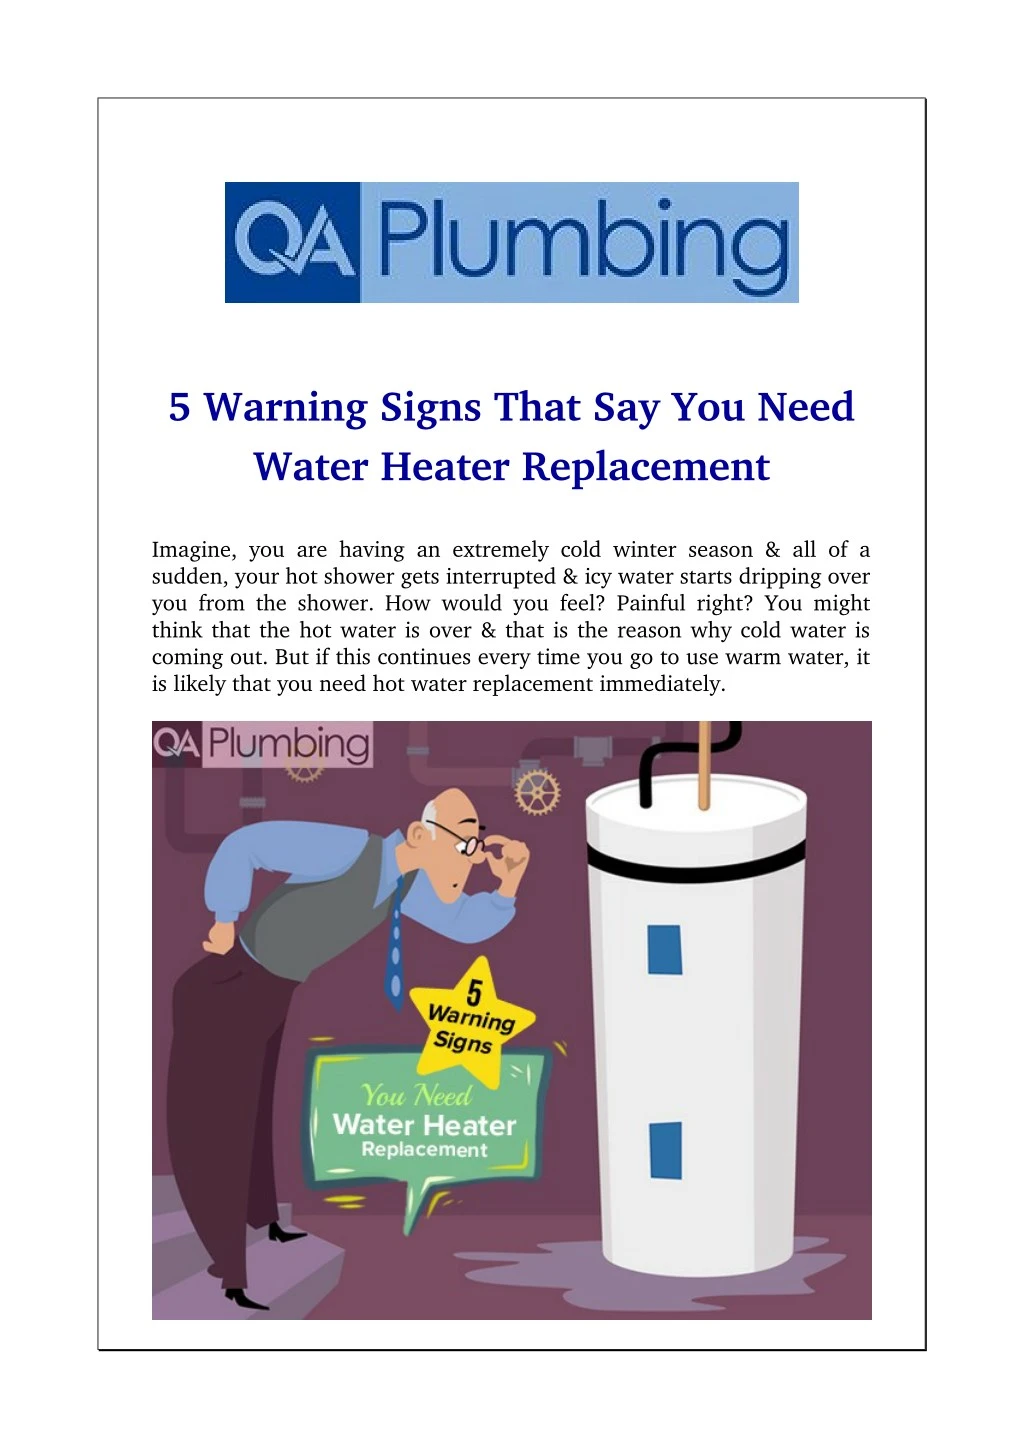 5 warning signs that say you need water heater